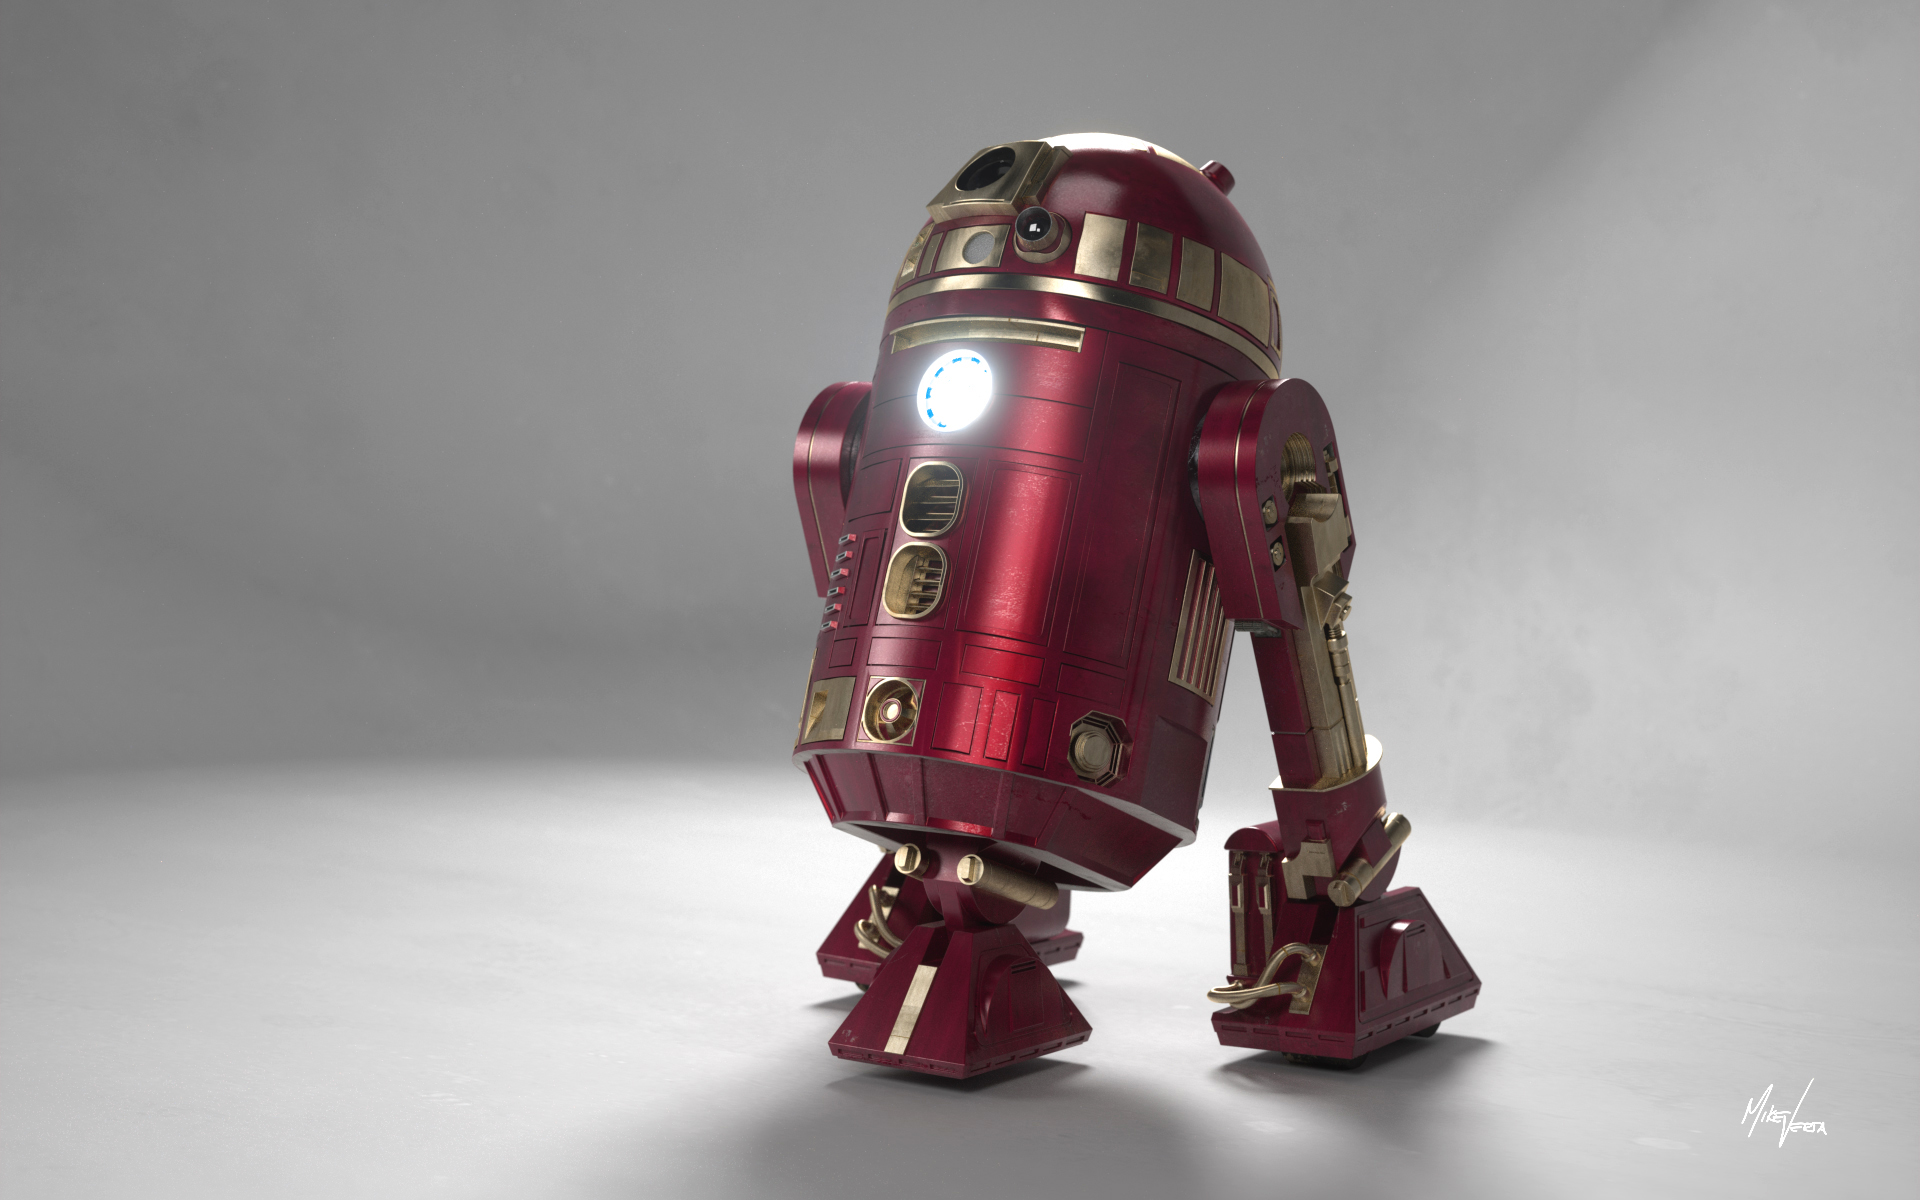 Free Download Enjoy Our Wallpaper Of The Week R2 D2 Droid Wallpapers 19x10 For Your Desktop Mobile Tablet Explore 50 R2 D2 Wallpaper Iphone R2d2 Wallpaper R2d2 Wallpaper Hd